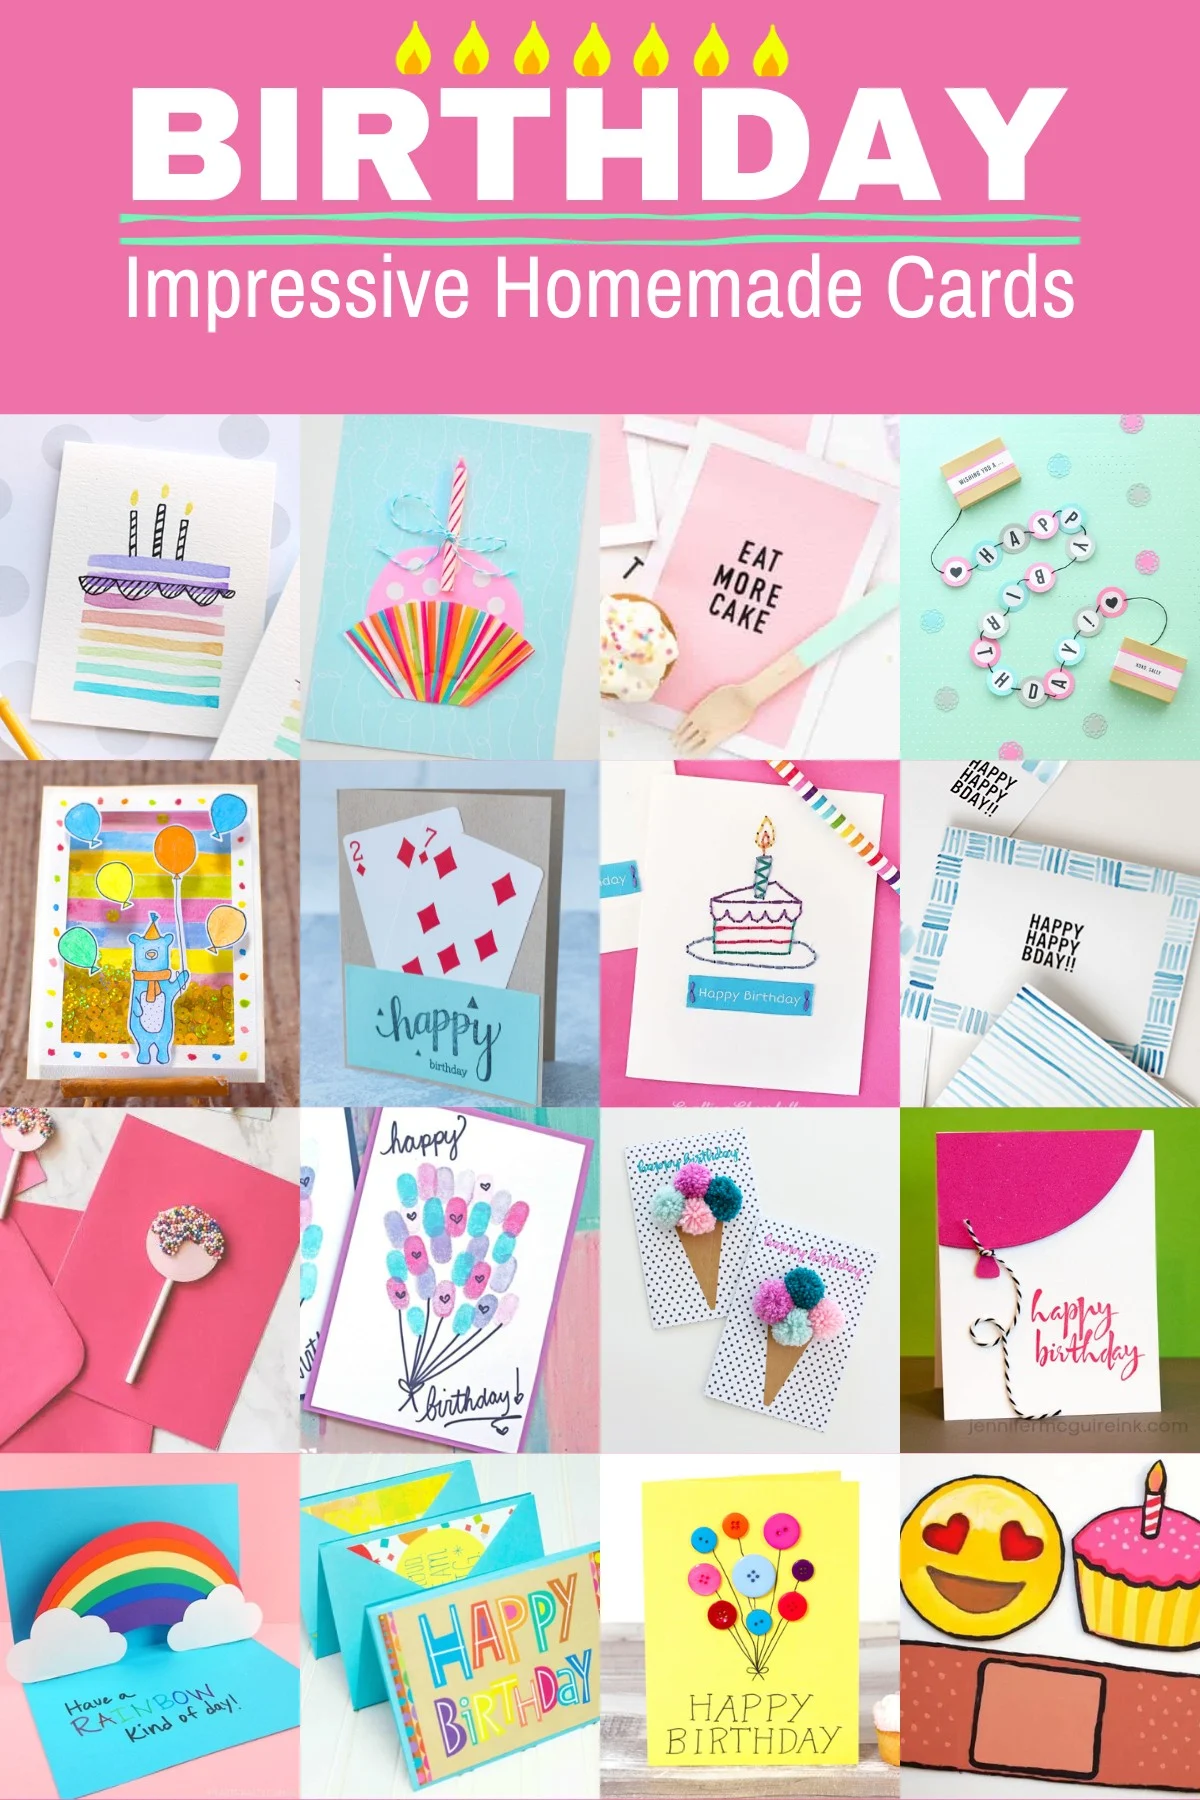 How to Make a Beautiful Handmade Card in 10 Minutes